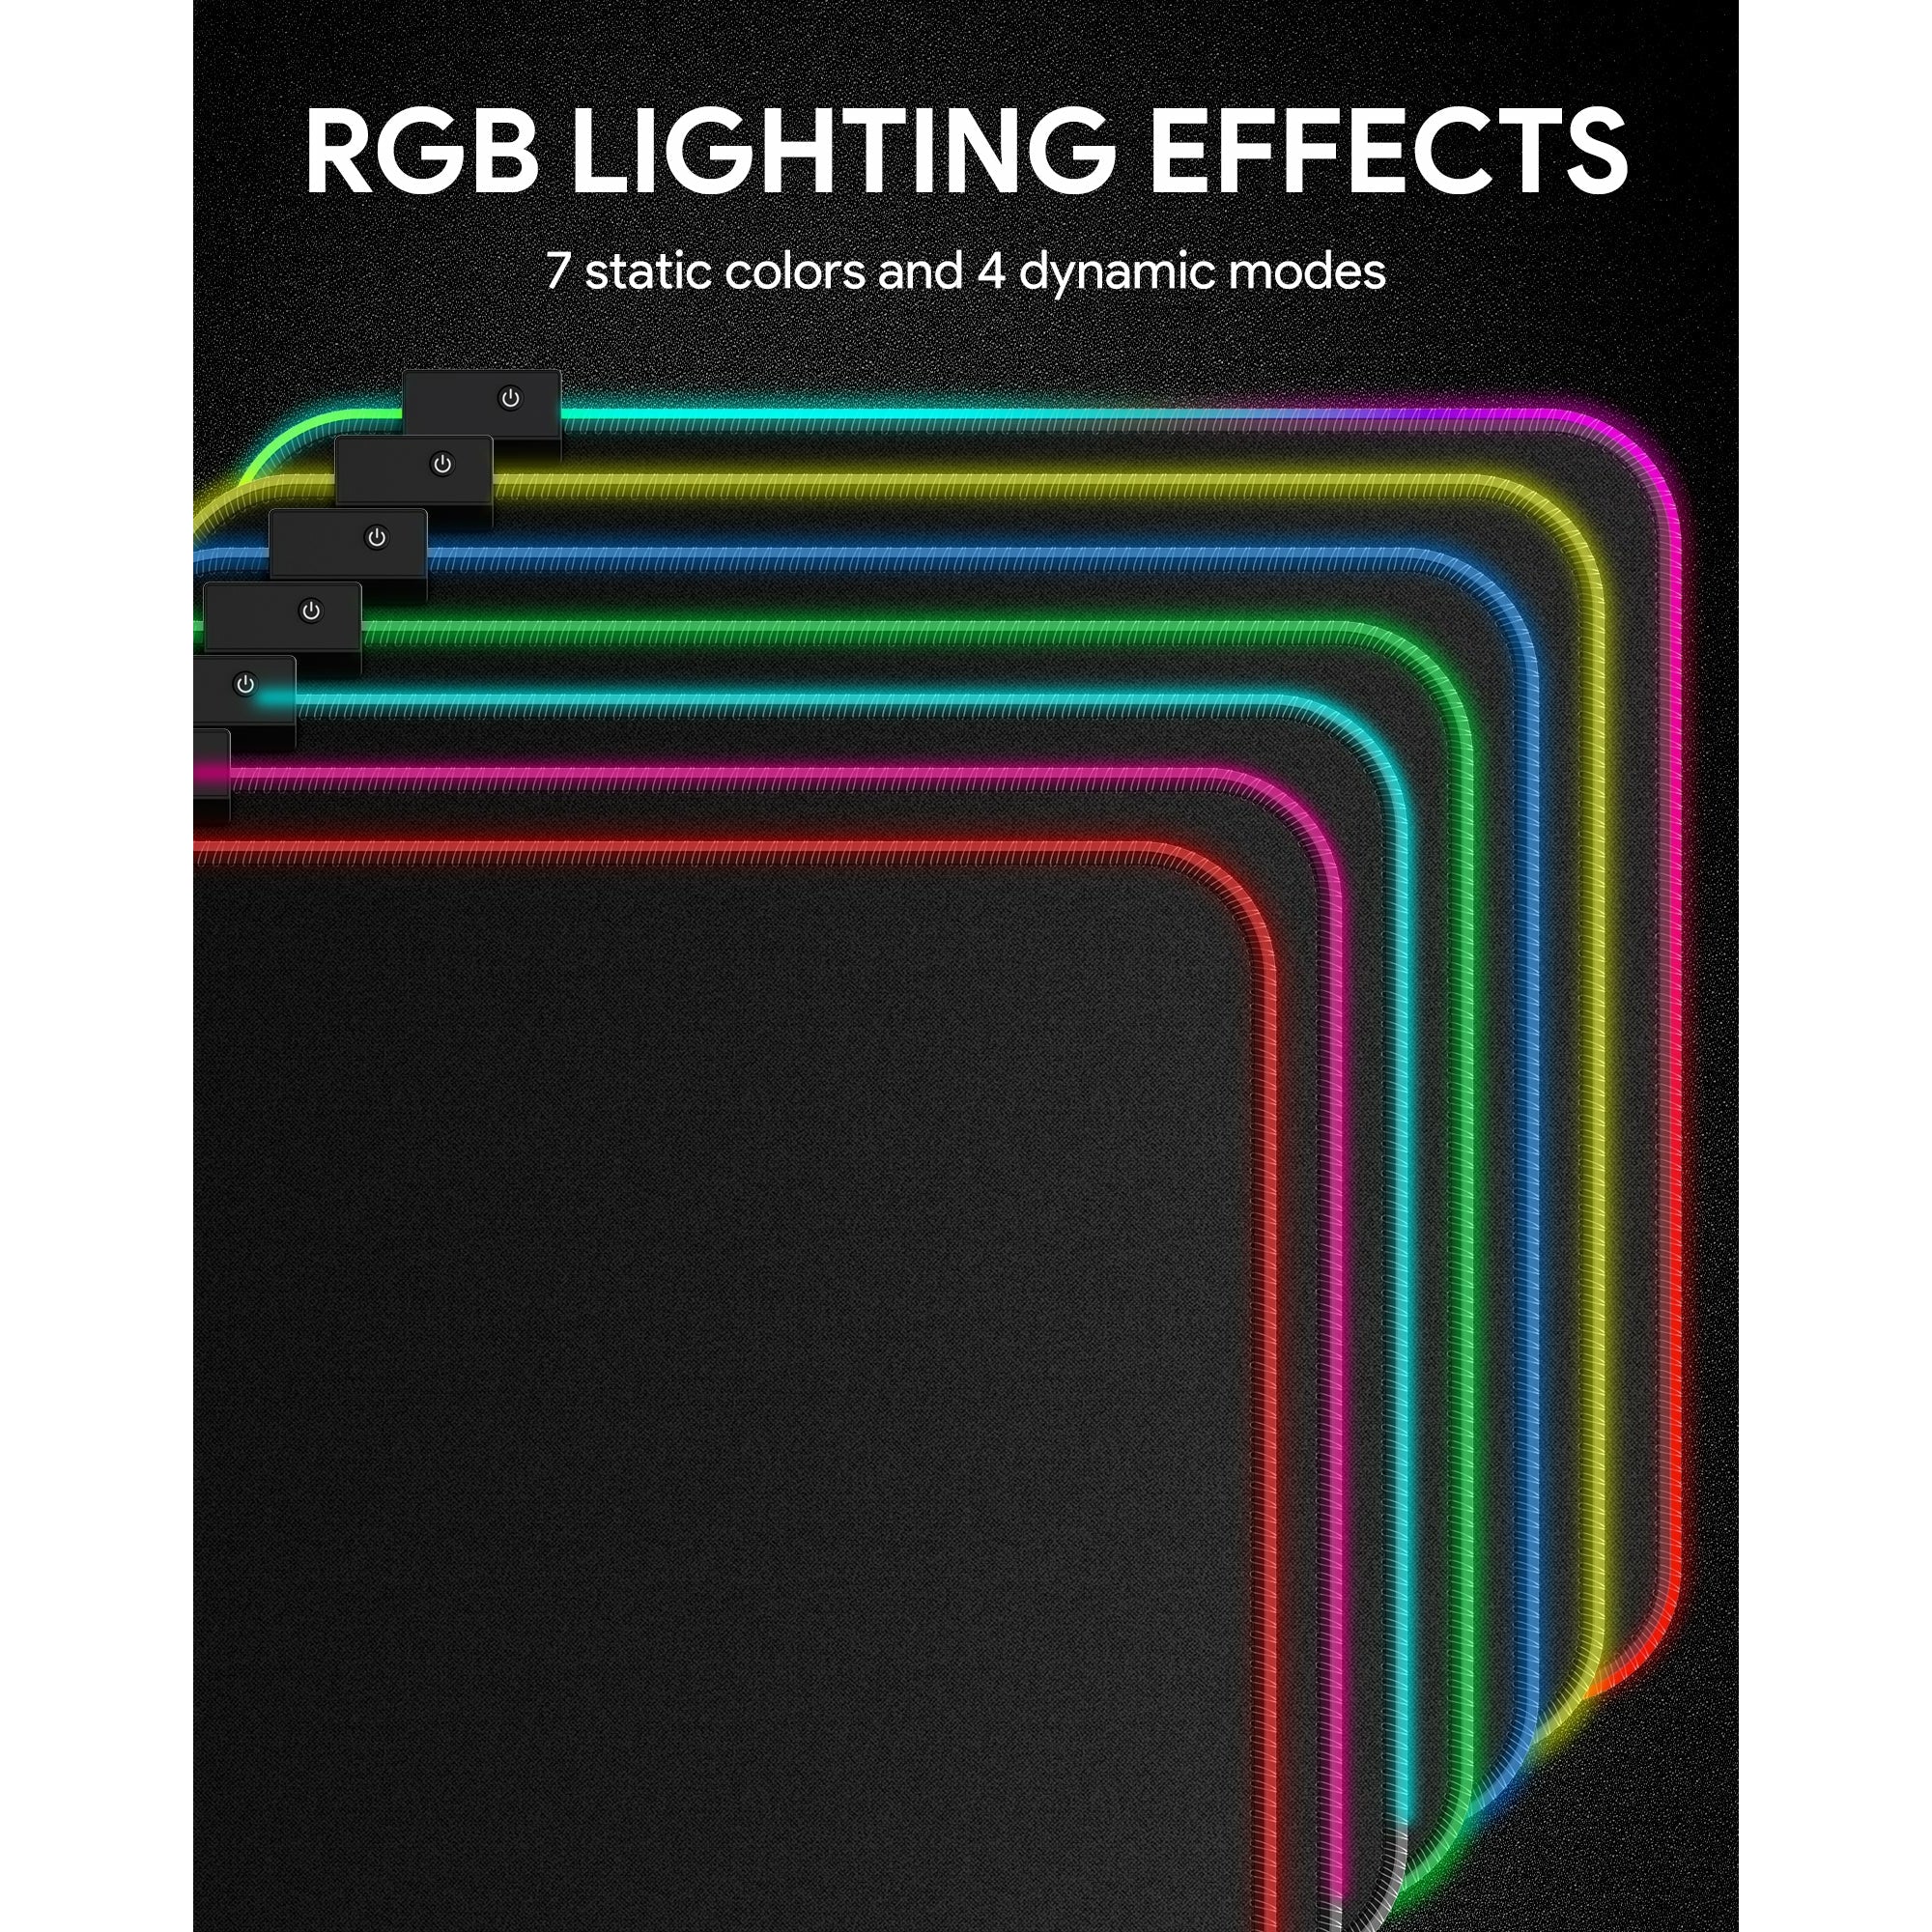 AUKEY RGB Gaming Mouse Pad, 450 x 400 x 4mm